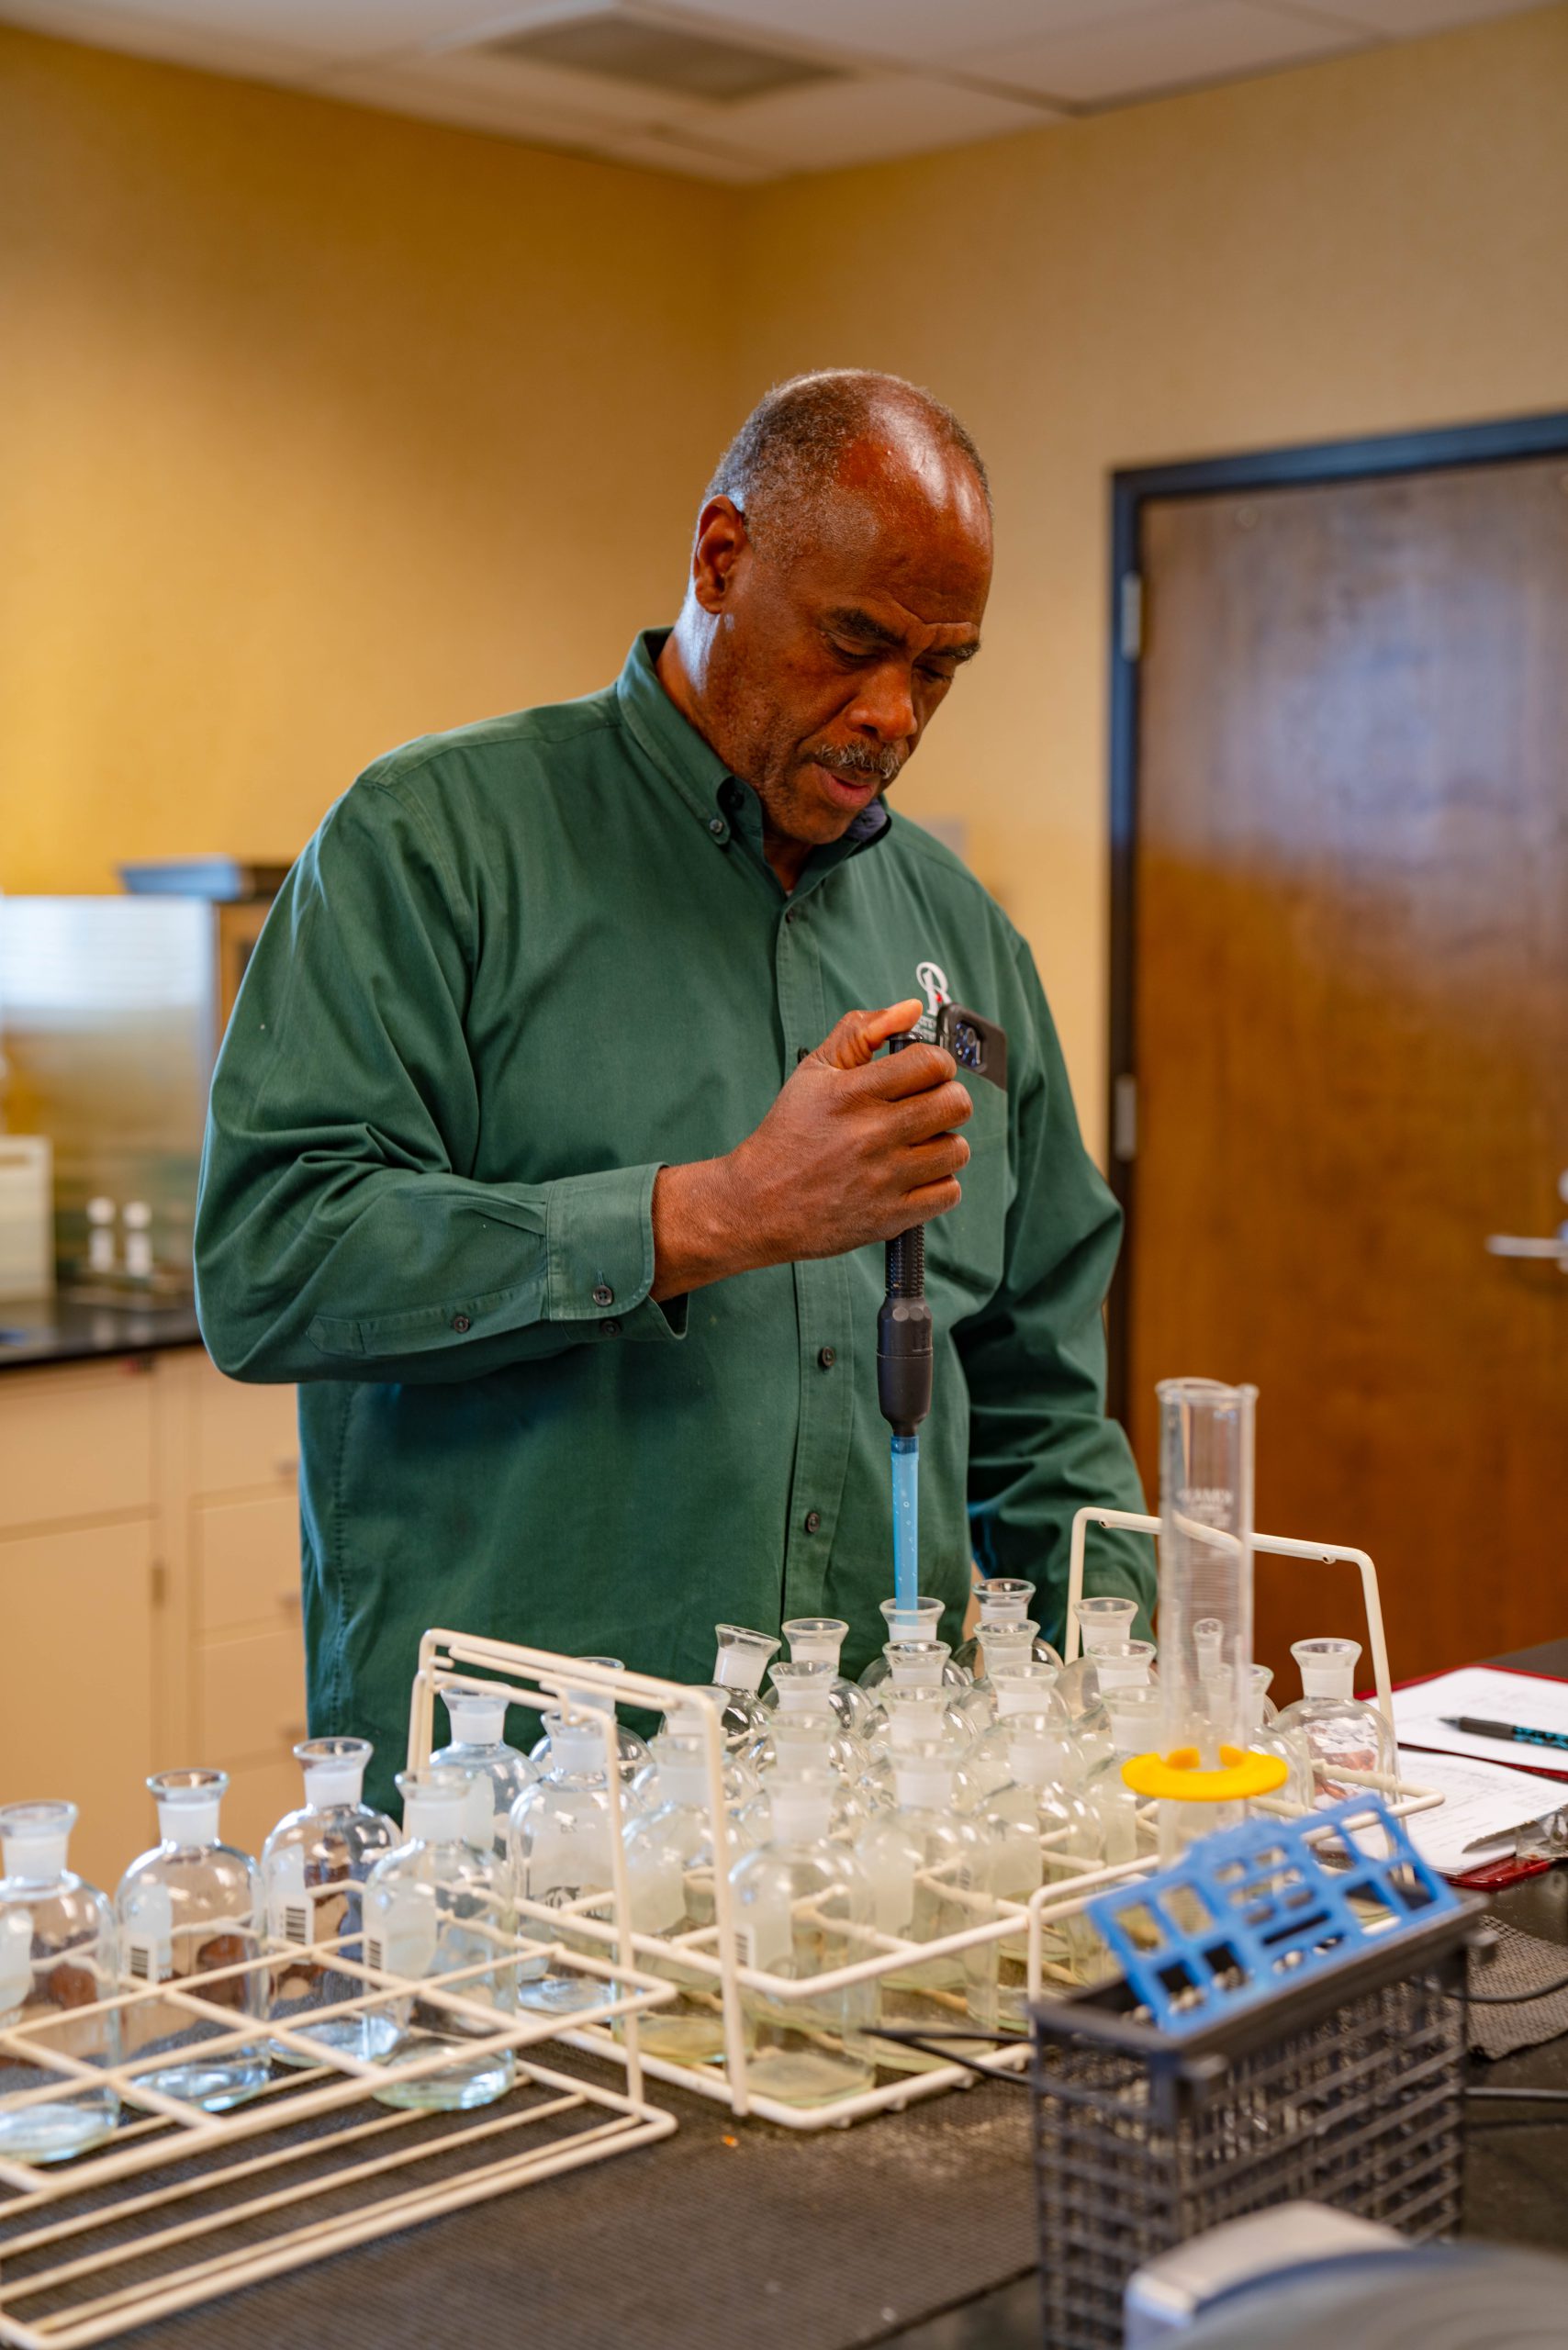 Wastewater worker testing water samples in the lab.